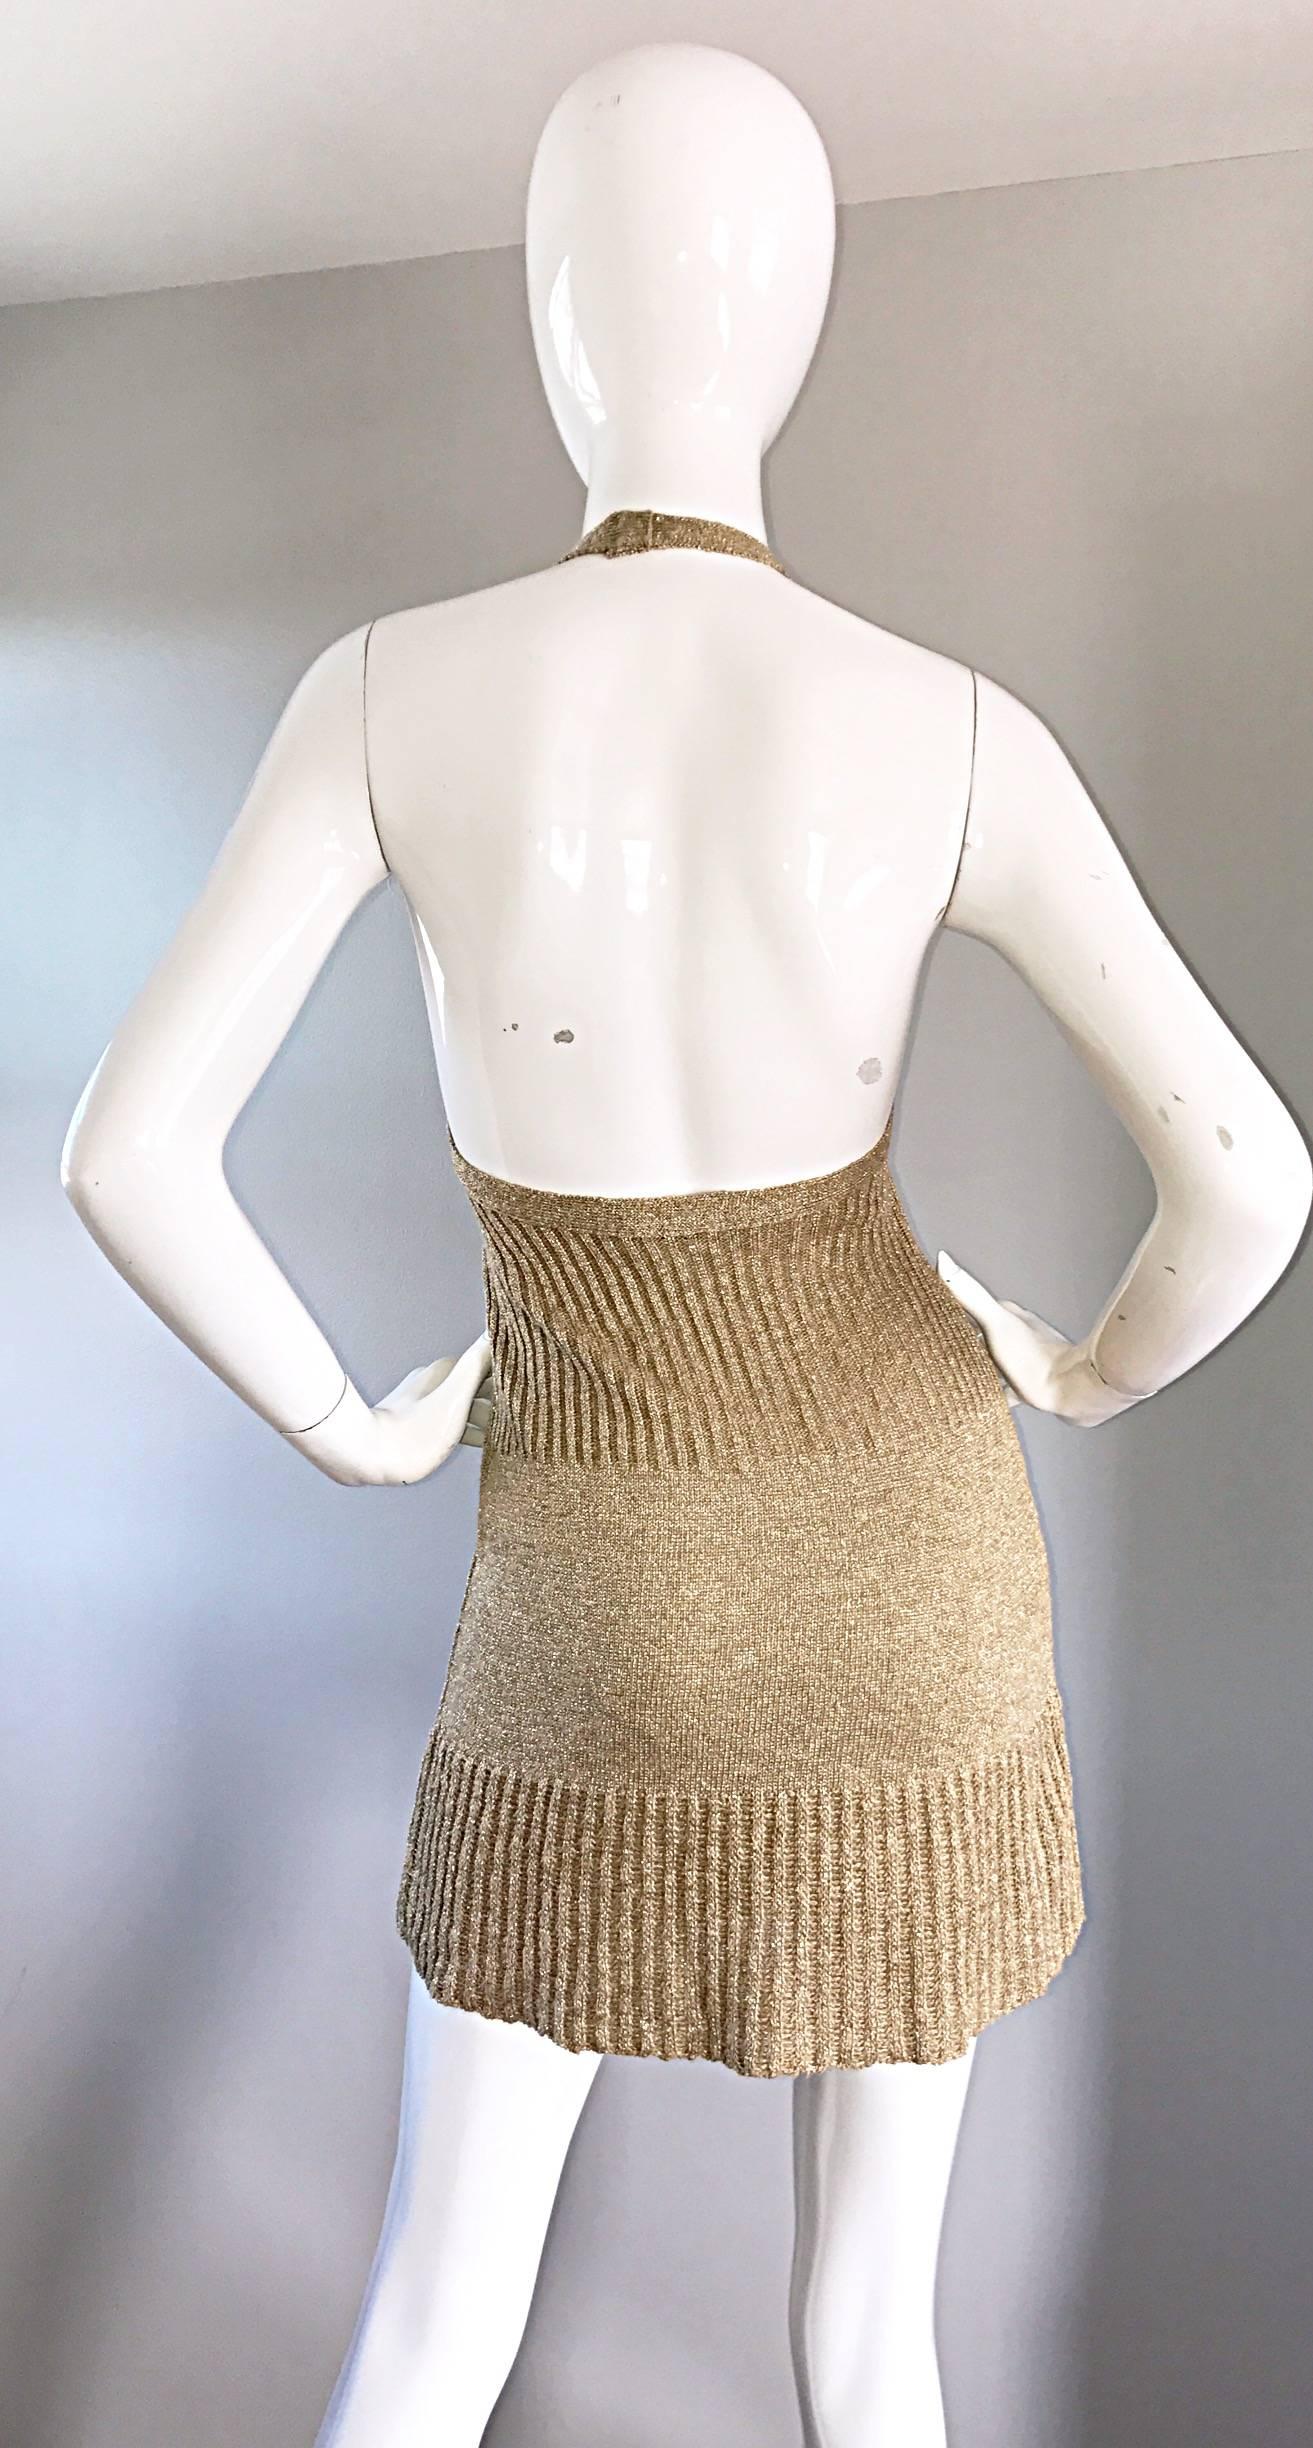 Vintage Moschino Cheap and Chic 1990s Gold Metallic Halter Neck Sweater Dress  1